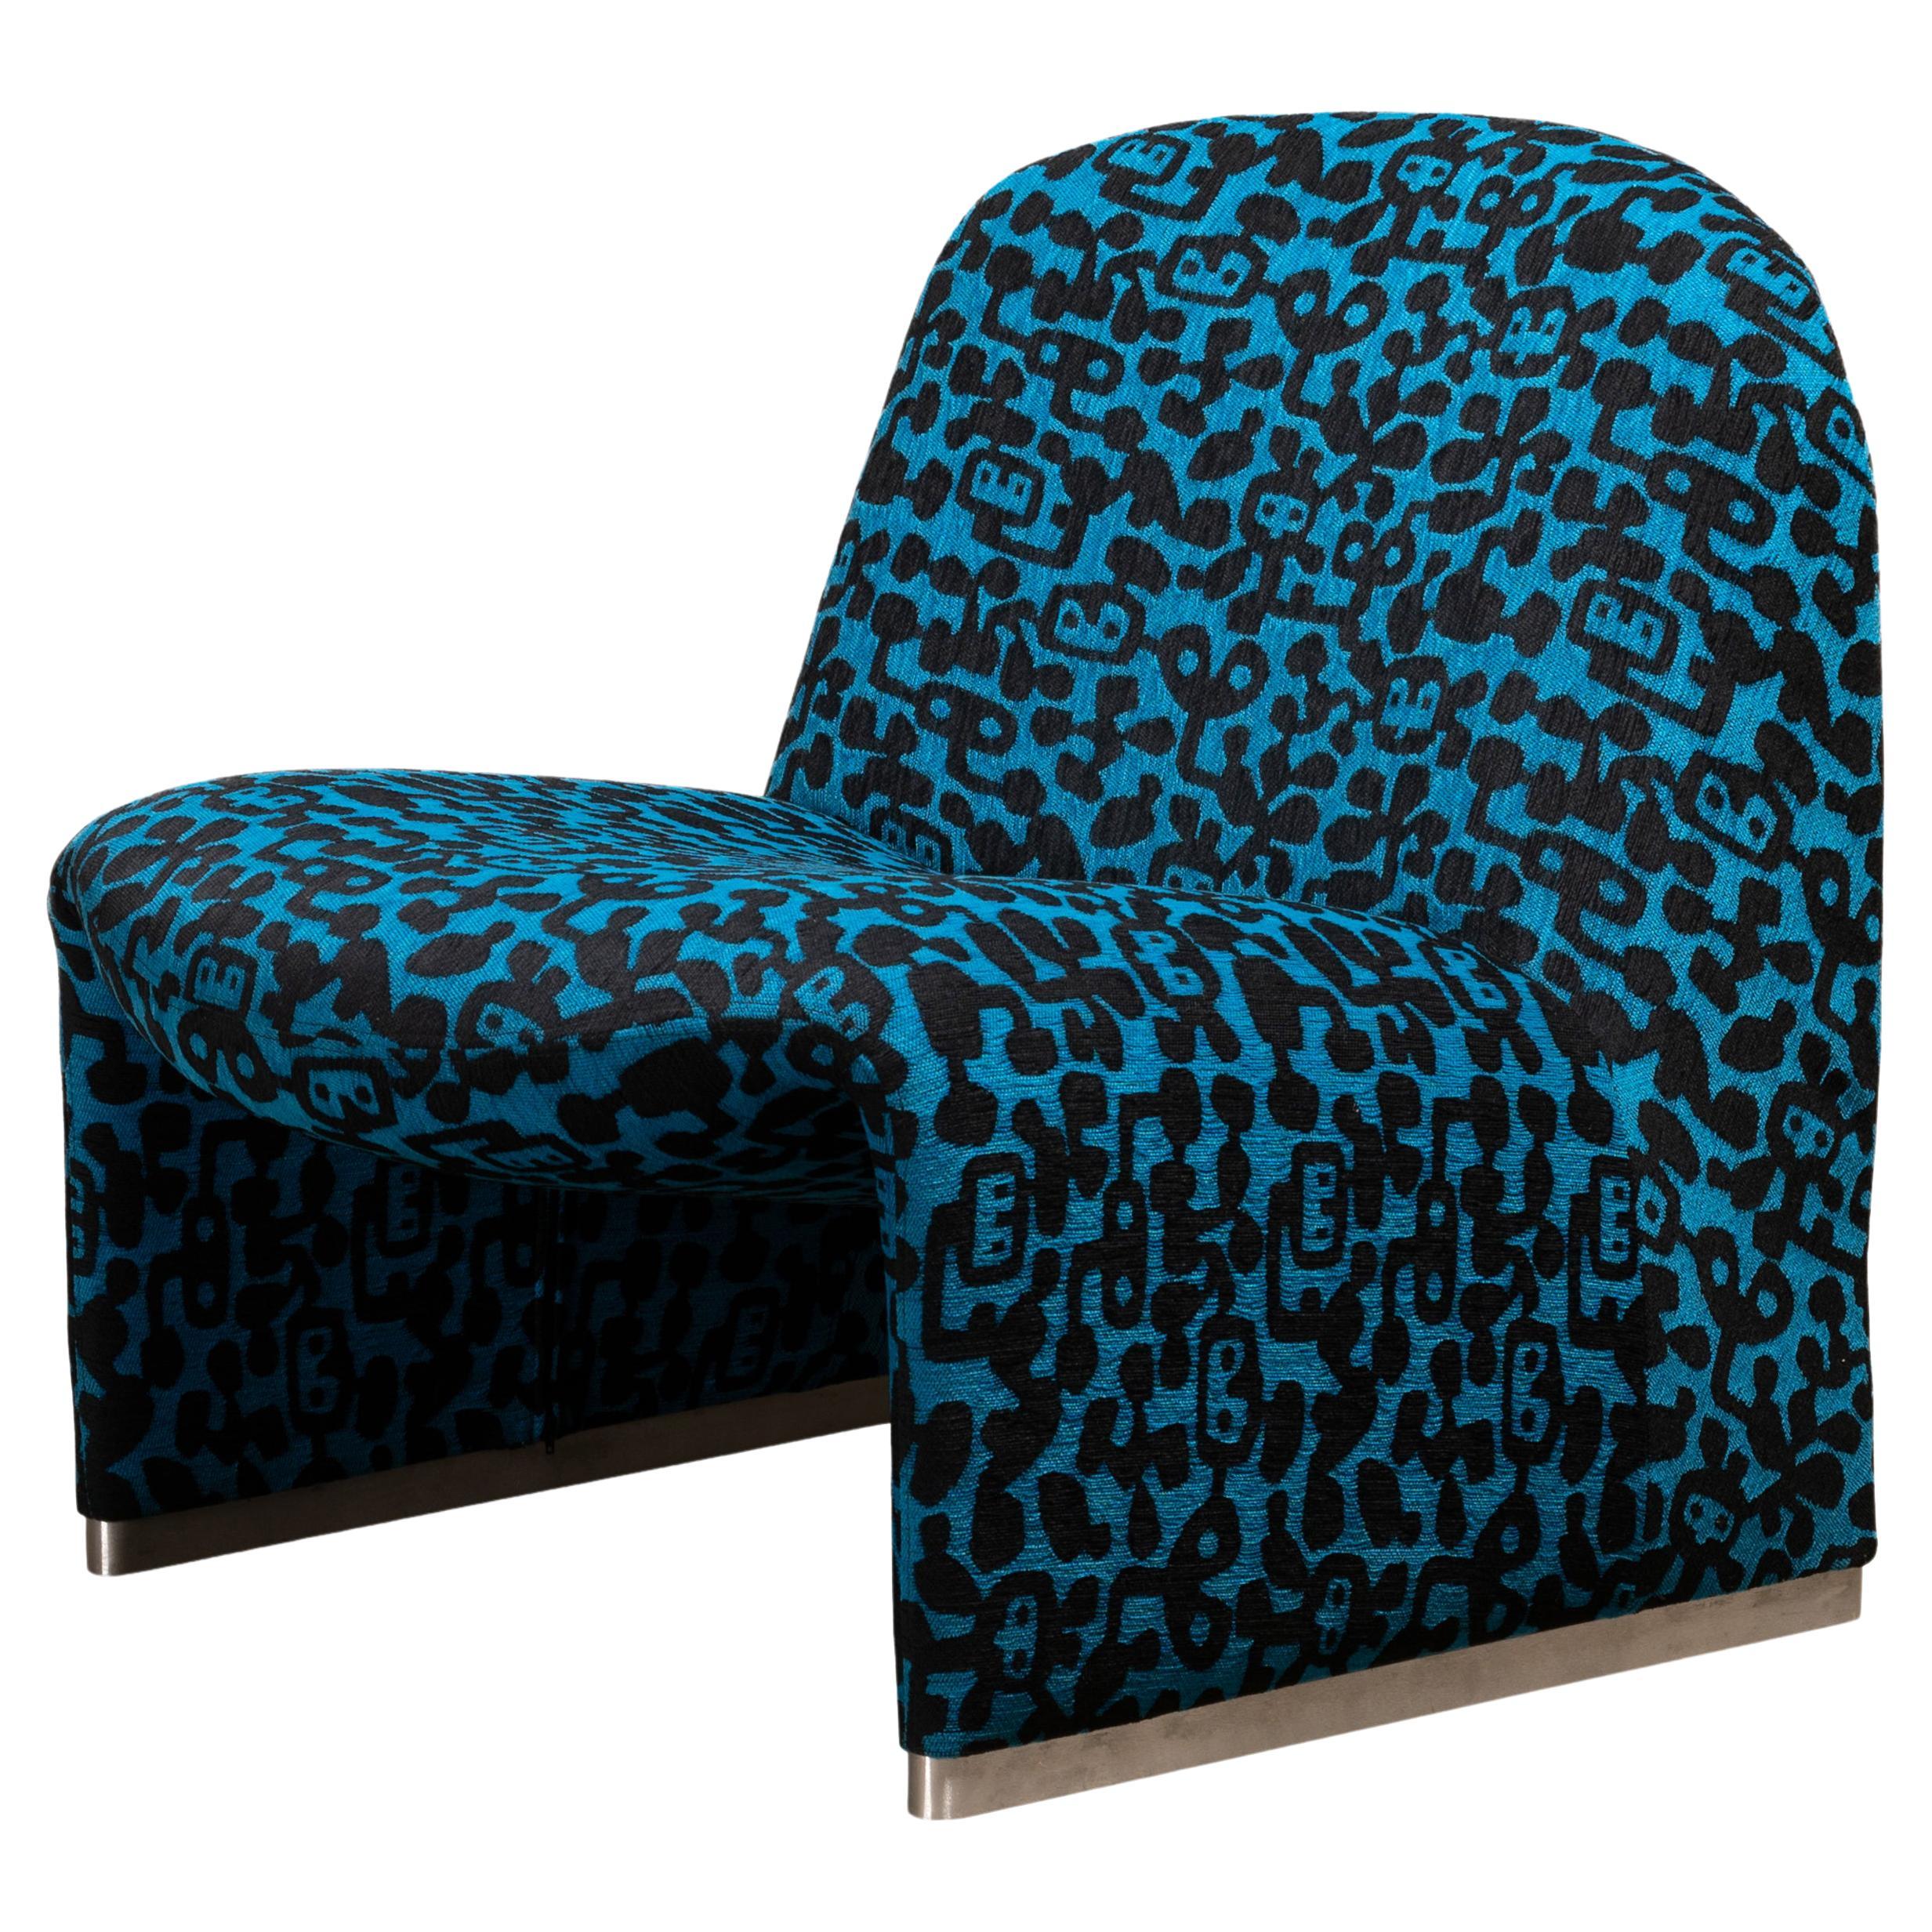 Giancarlo Piretti Alky Lounge Chair in Blue Fabric with Black Pattern, Artifort